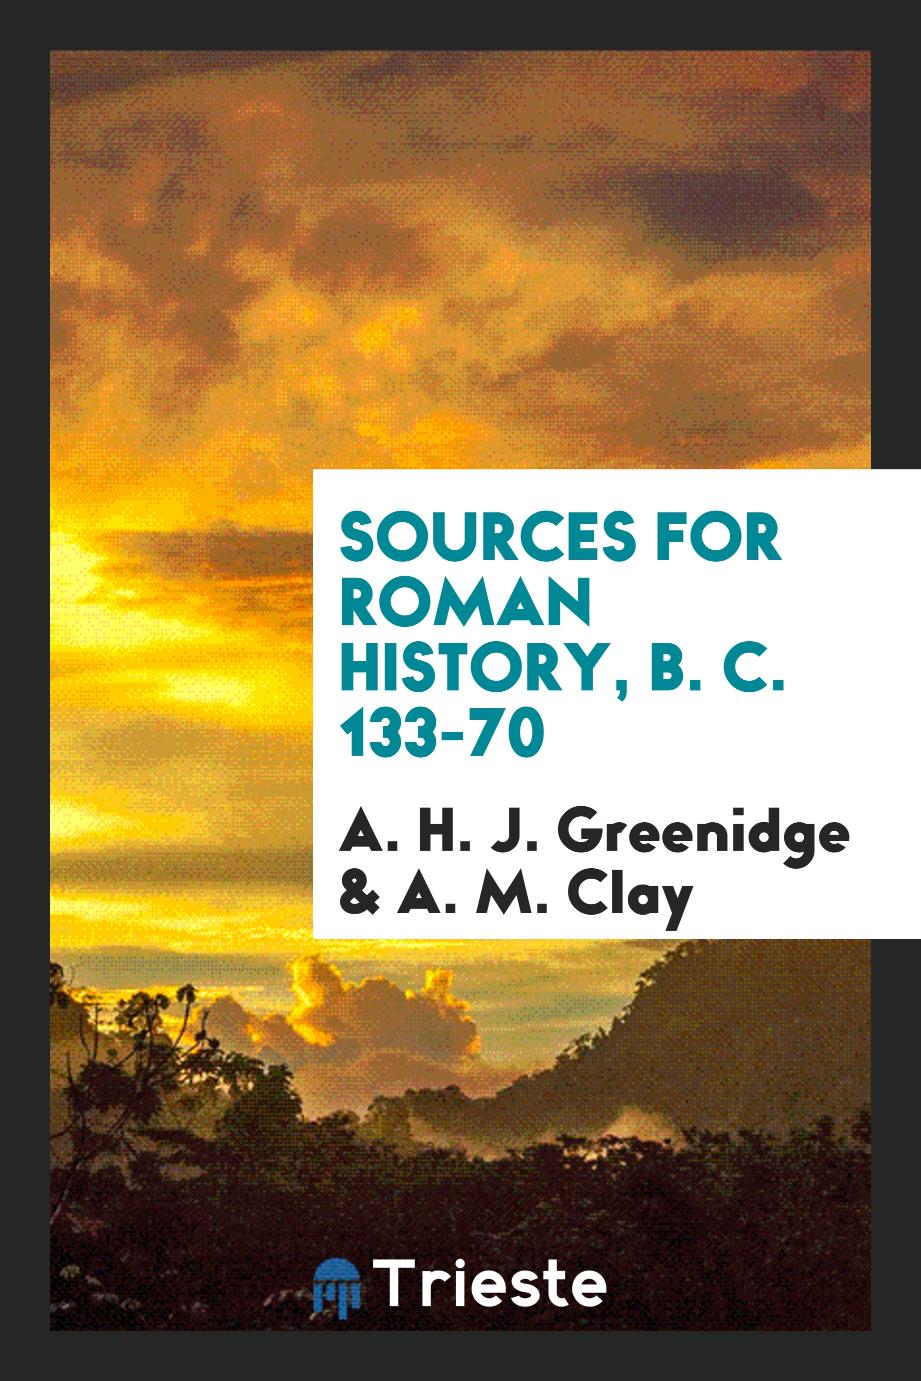 Sources for Roman History, B. C. 133-70